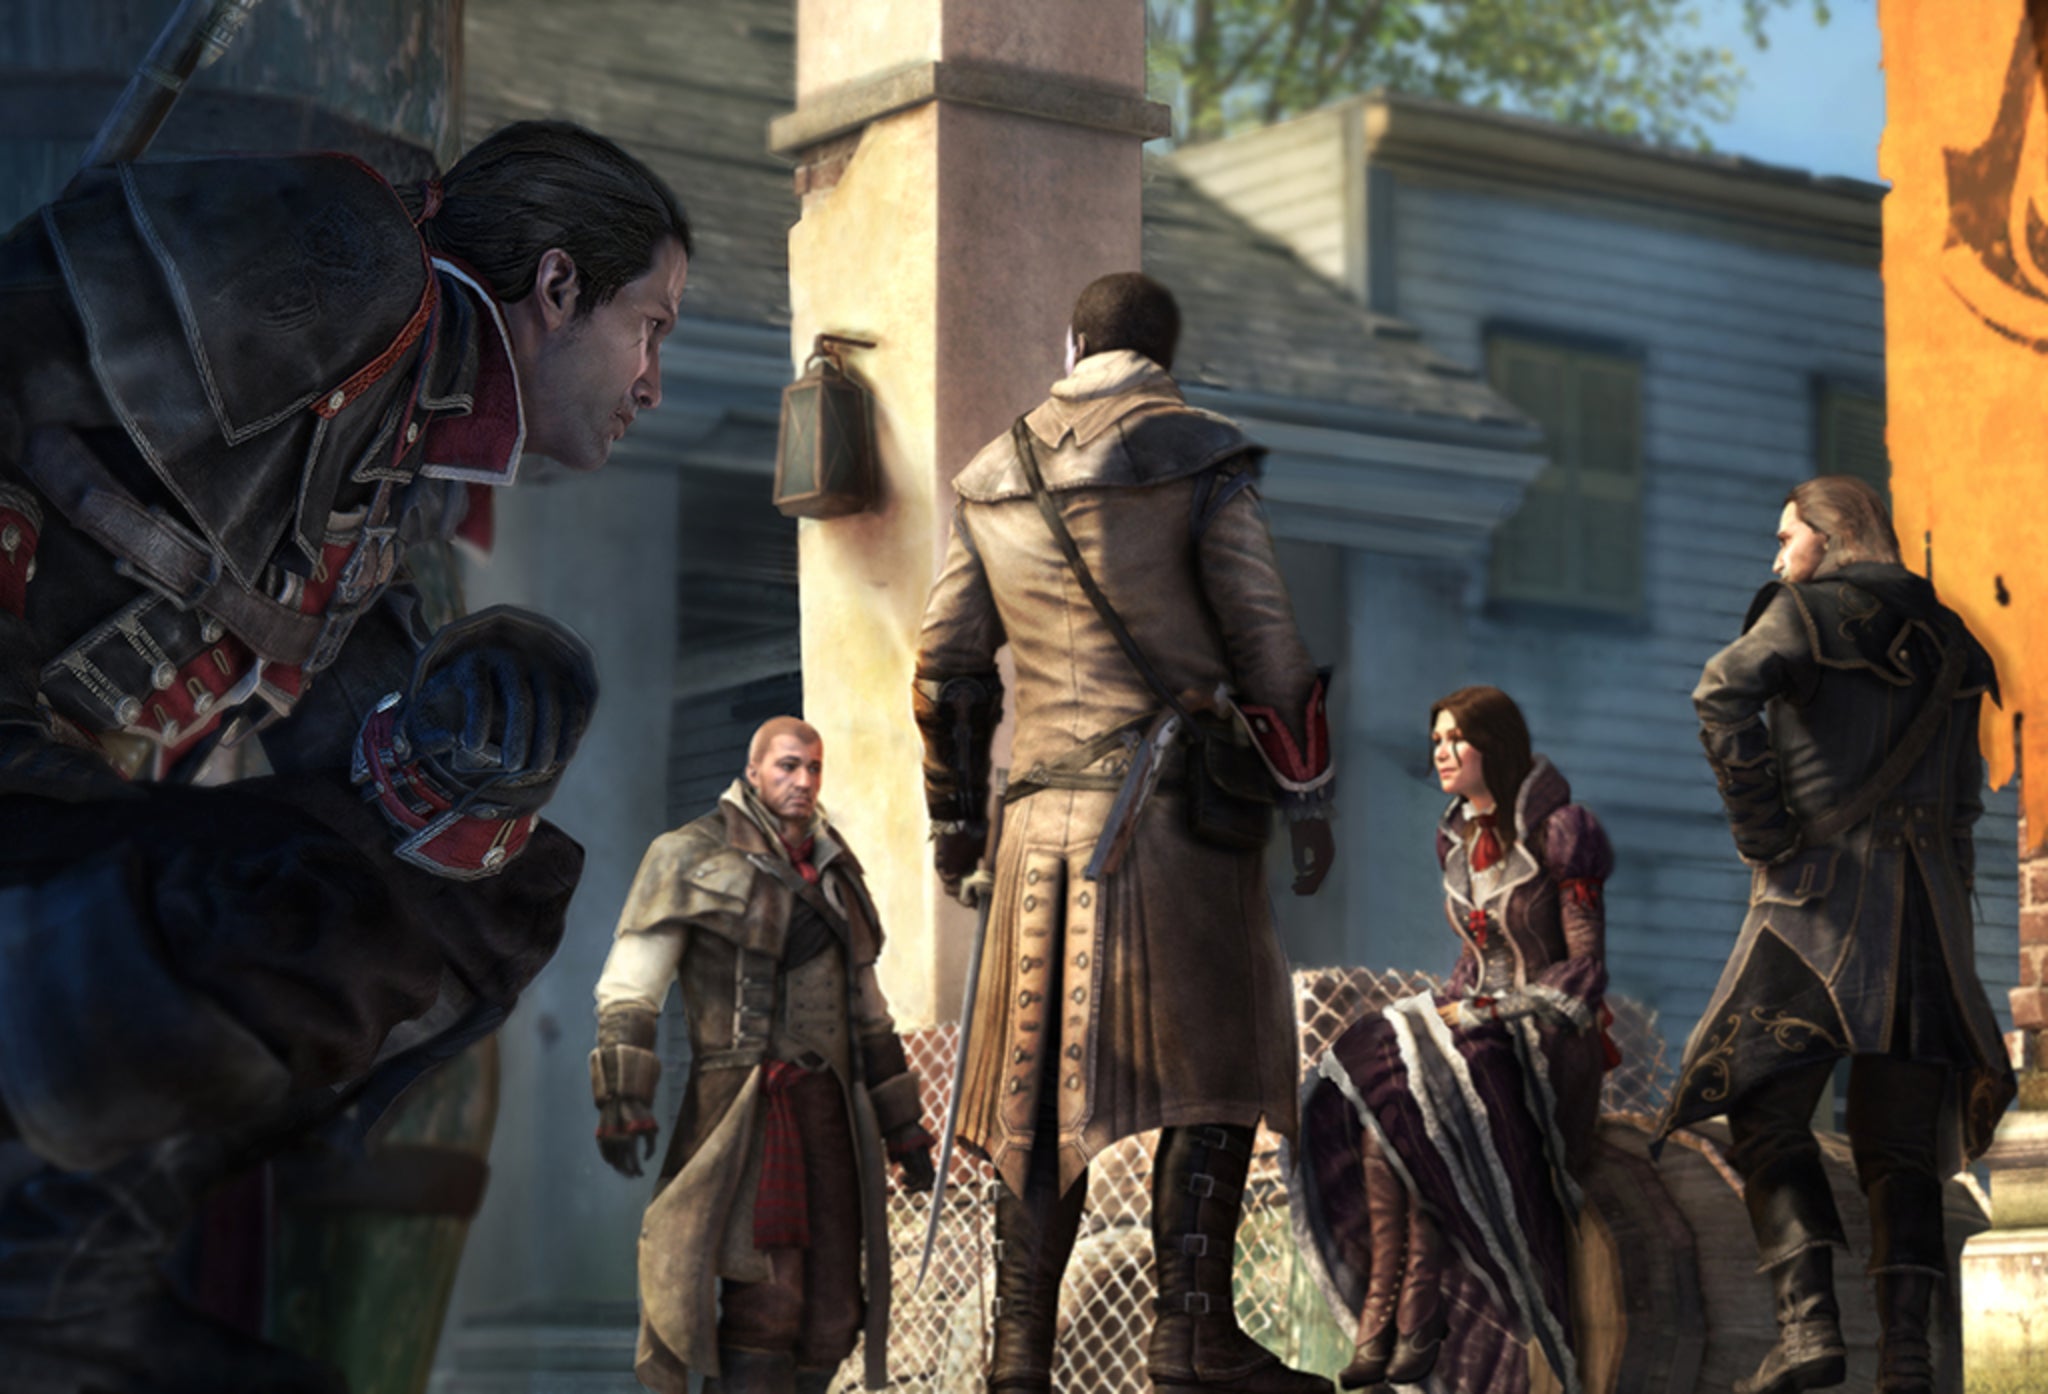 Review: Assassin's Creed Rogue